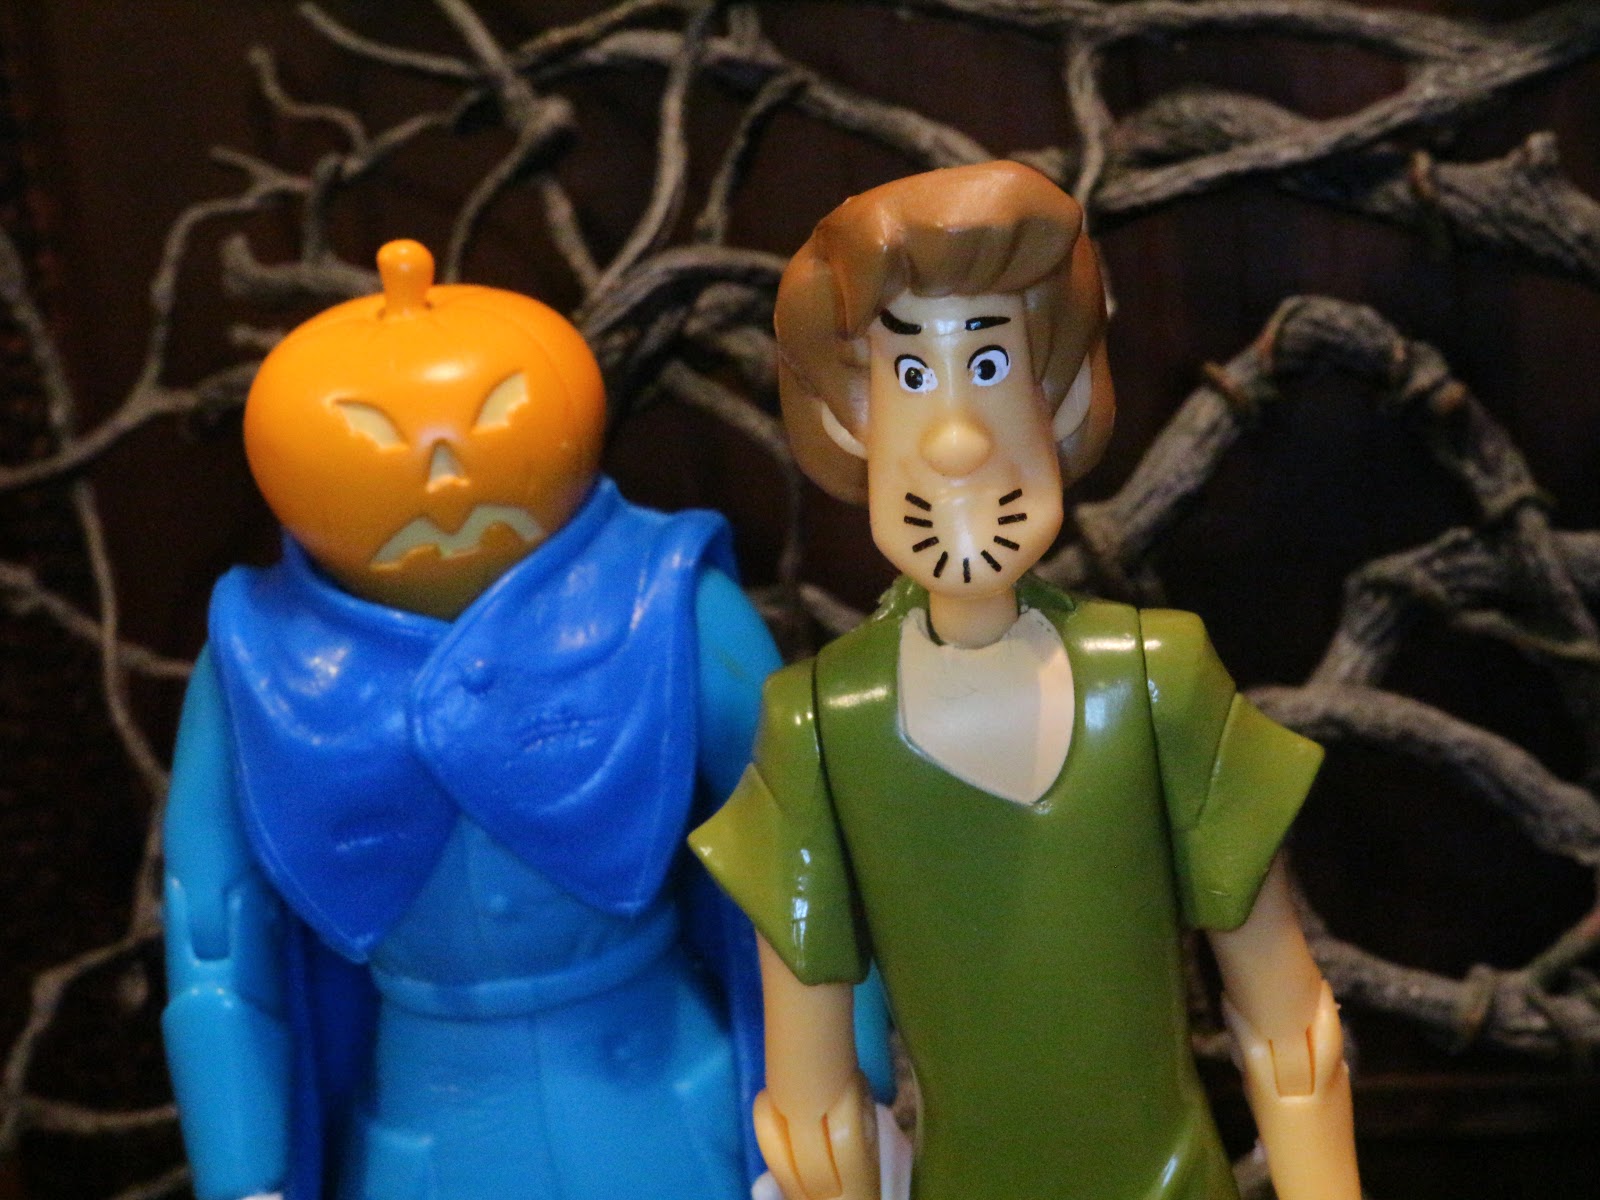 Action Figure Barbecue Re Halloween Special Shaggy And The Headless Horseman From Scooby Doo 50 Years By Character Options - roblox halloween 2019